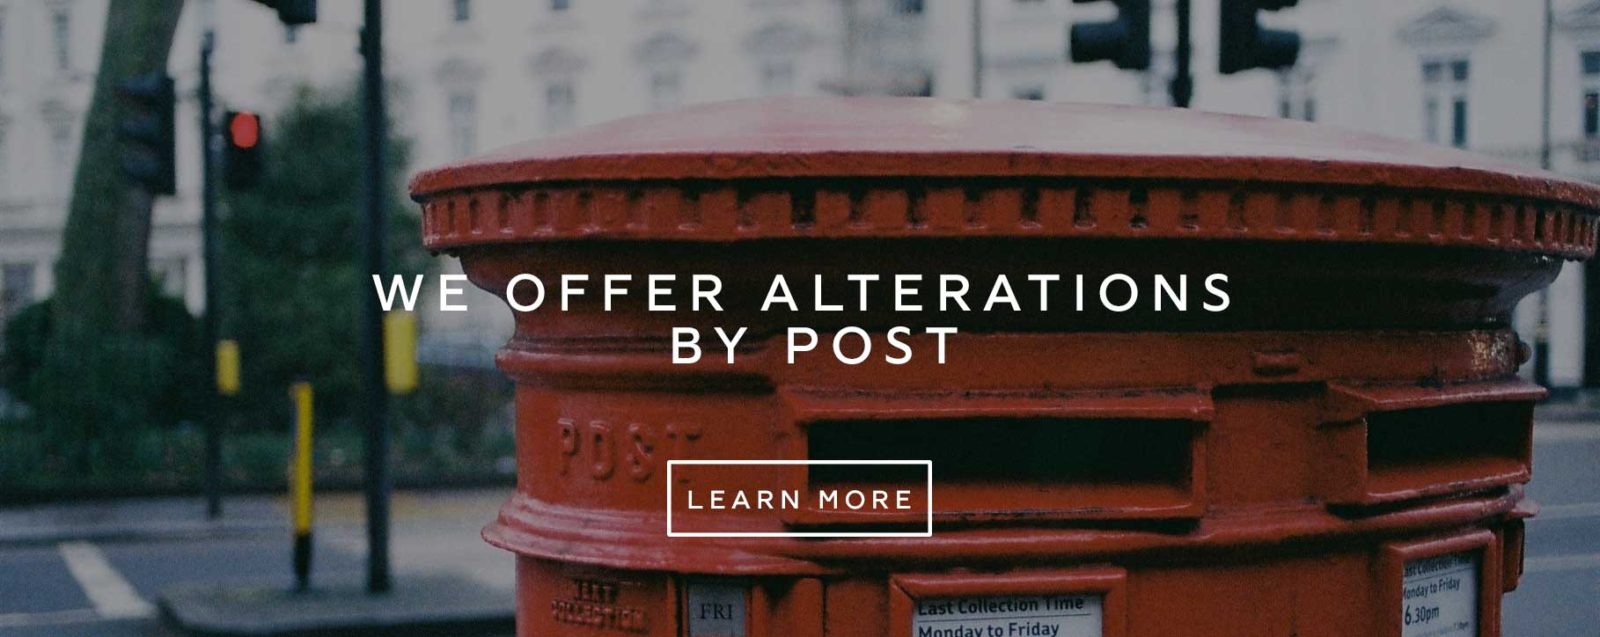 Alterations Service By Post